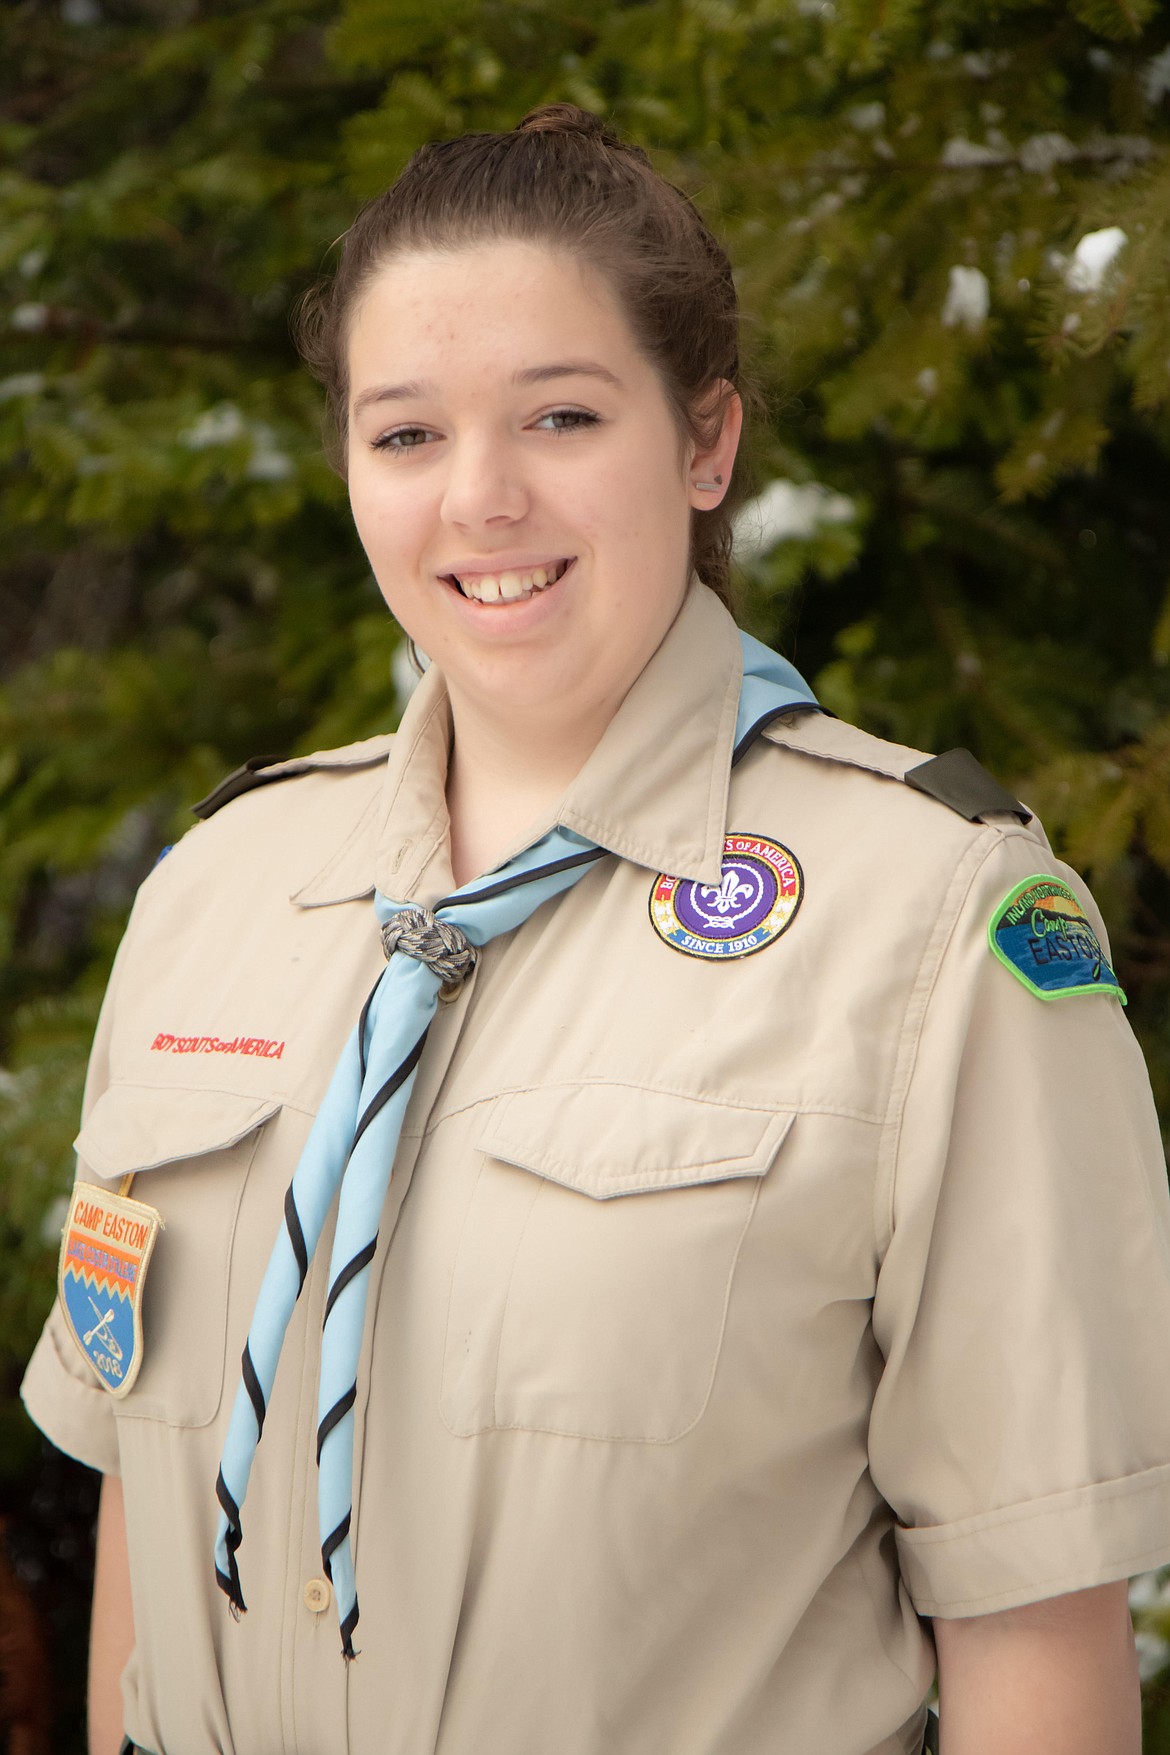 Rachel Peck, 16, of Bayview, will officially become a Scout BSA when the Boy Scouts of America launches the new Scout program for boys and girls Feb. 1. Rachel plans to earn her Eagle Scout rank, a high honor that previously was only offered to boys. (Courtesy photo)